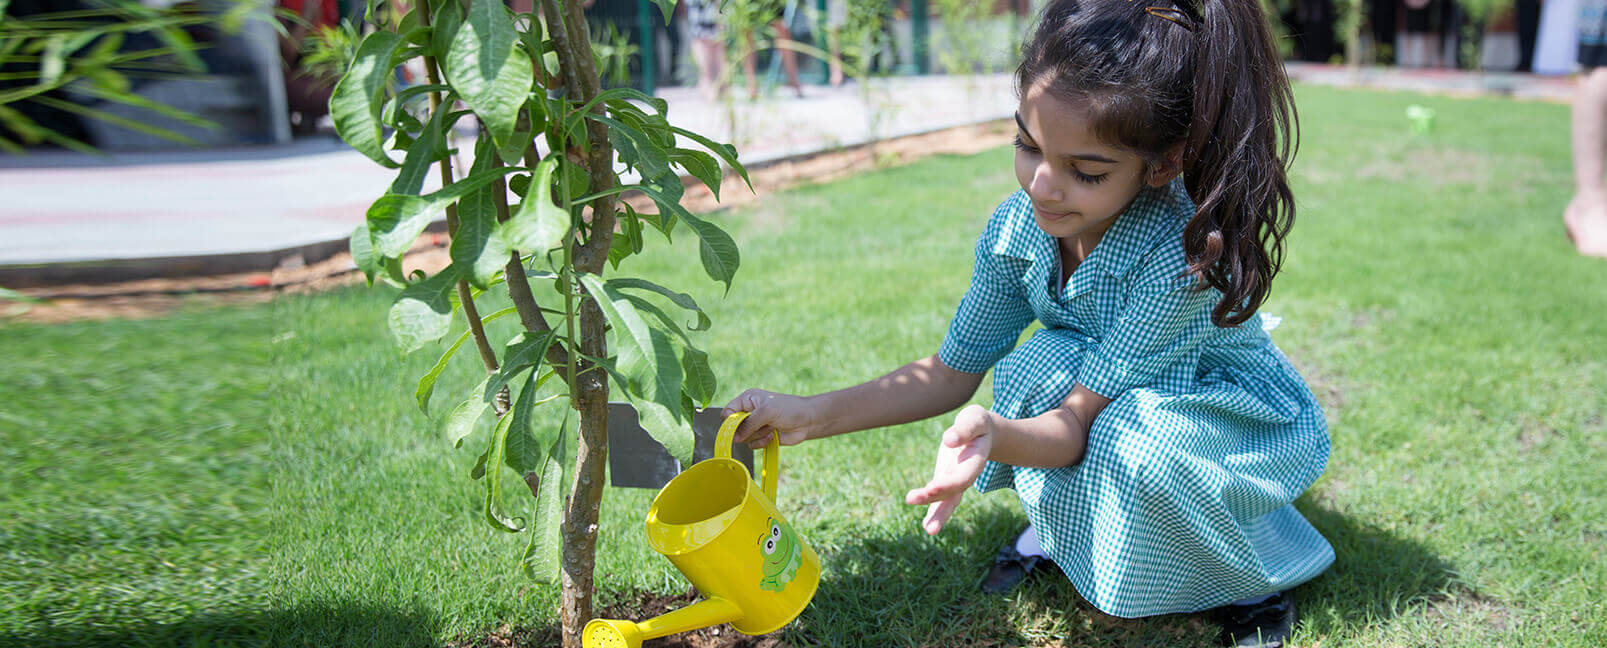 Aspen Heights British School in Abu Dhabi - a focus on the local environment